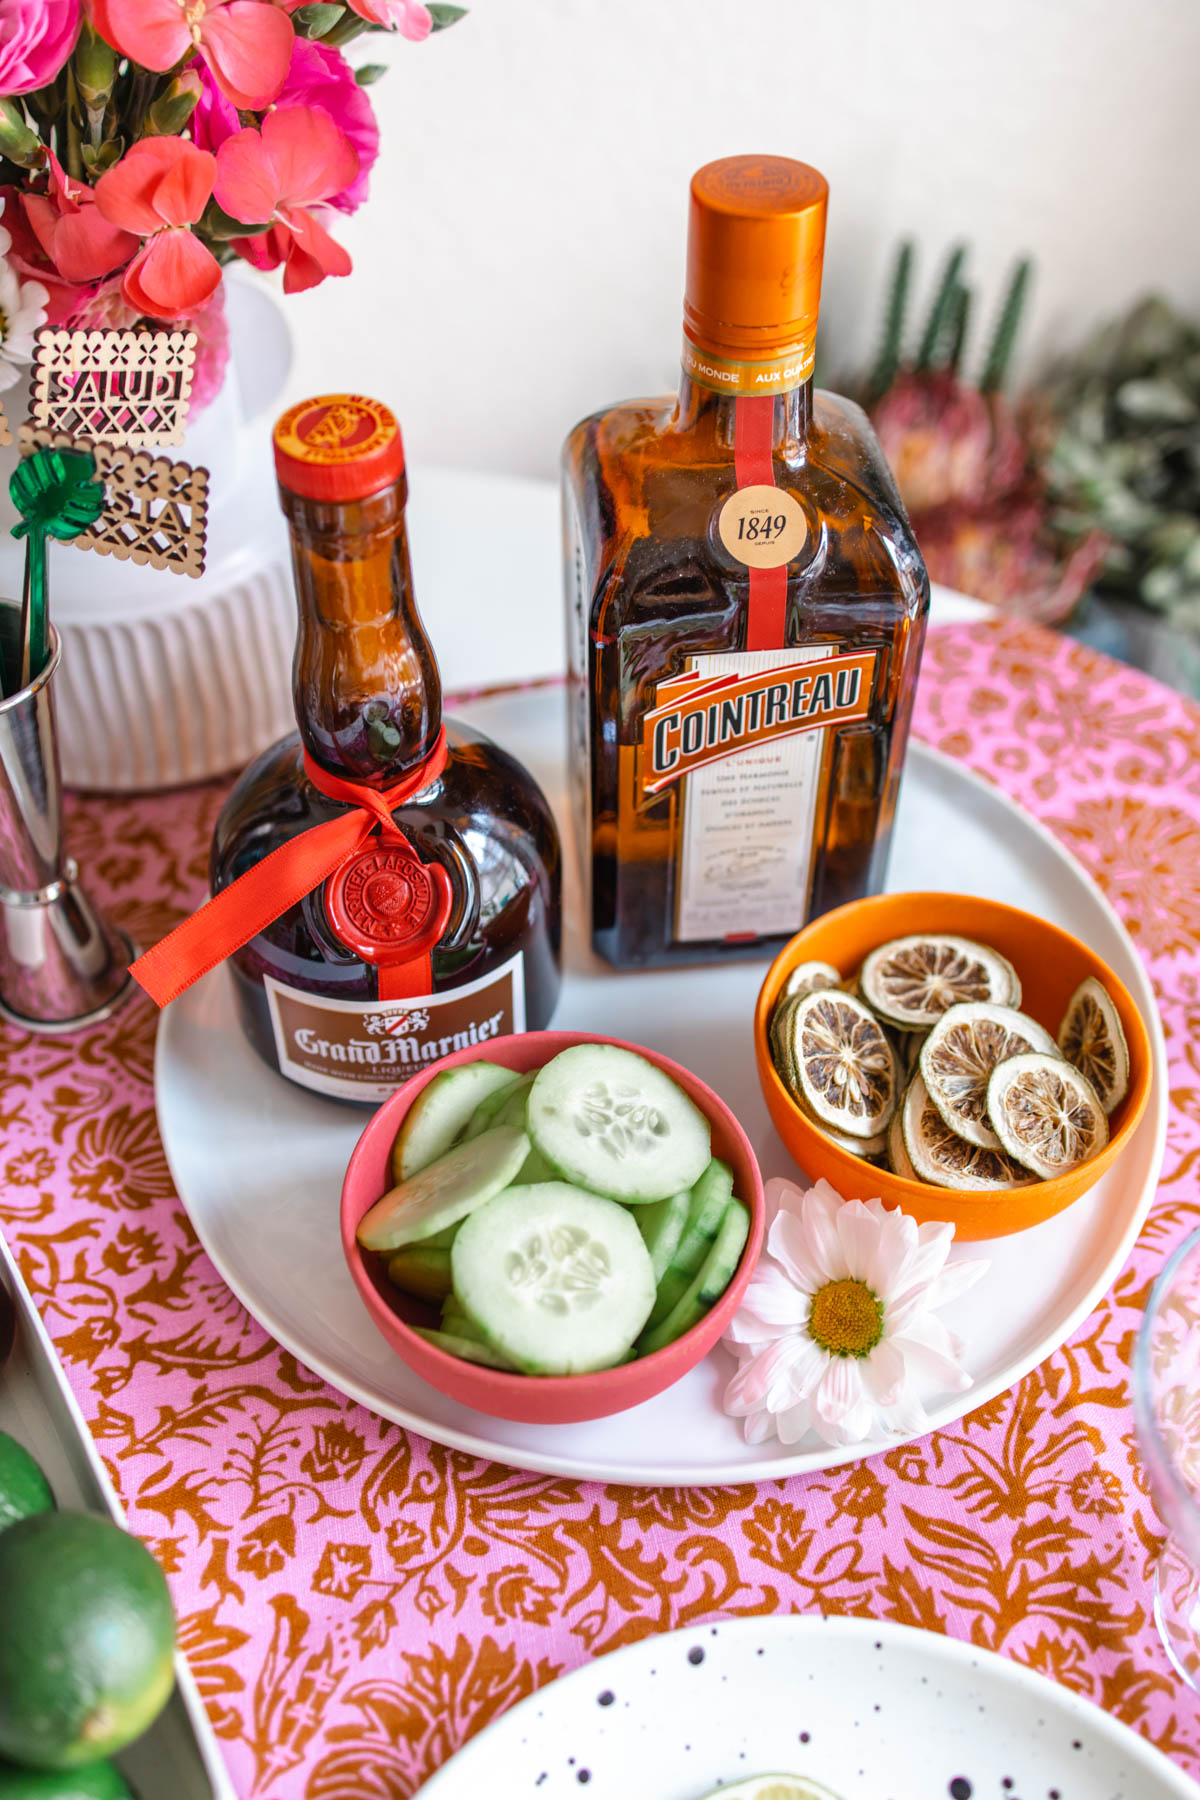 Bottles of Grand Marnier and Cointreau behind two bowls filled with cucumber slices and dried lime wheels.